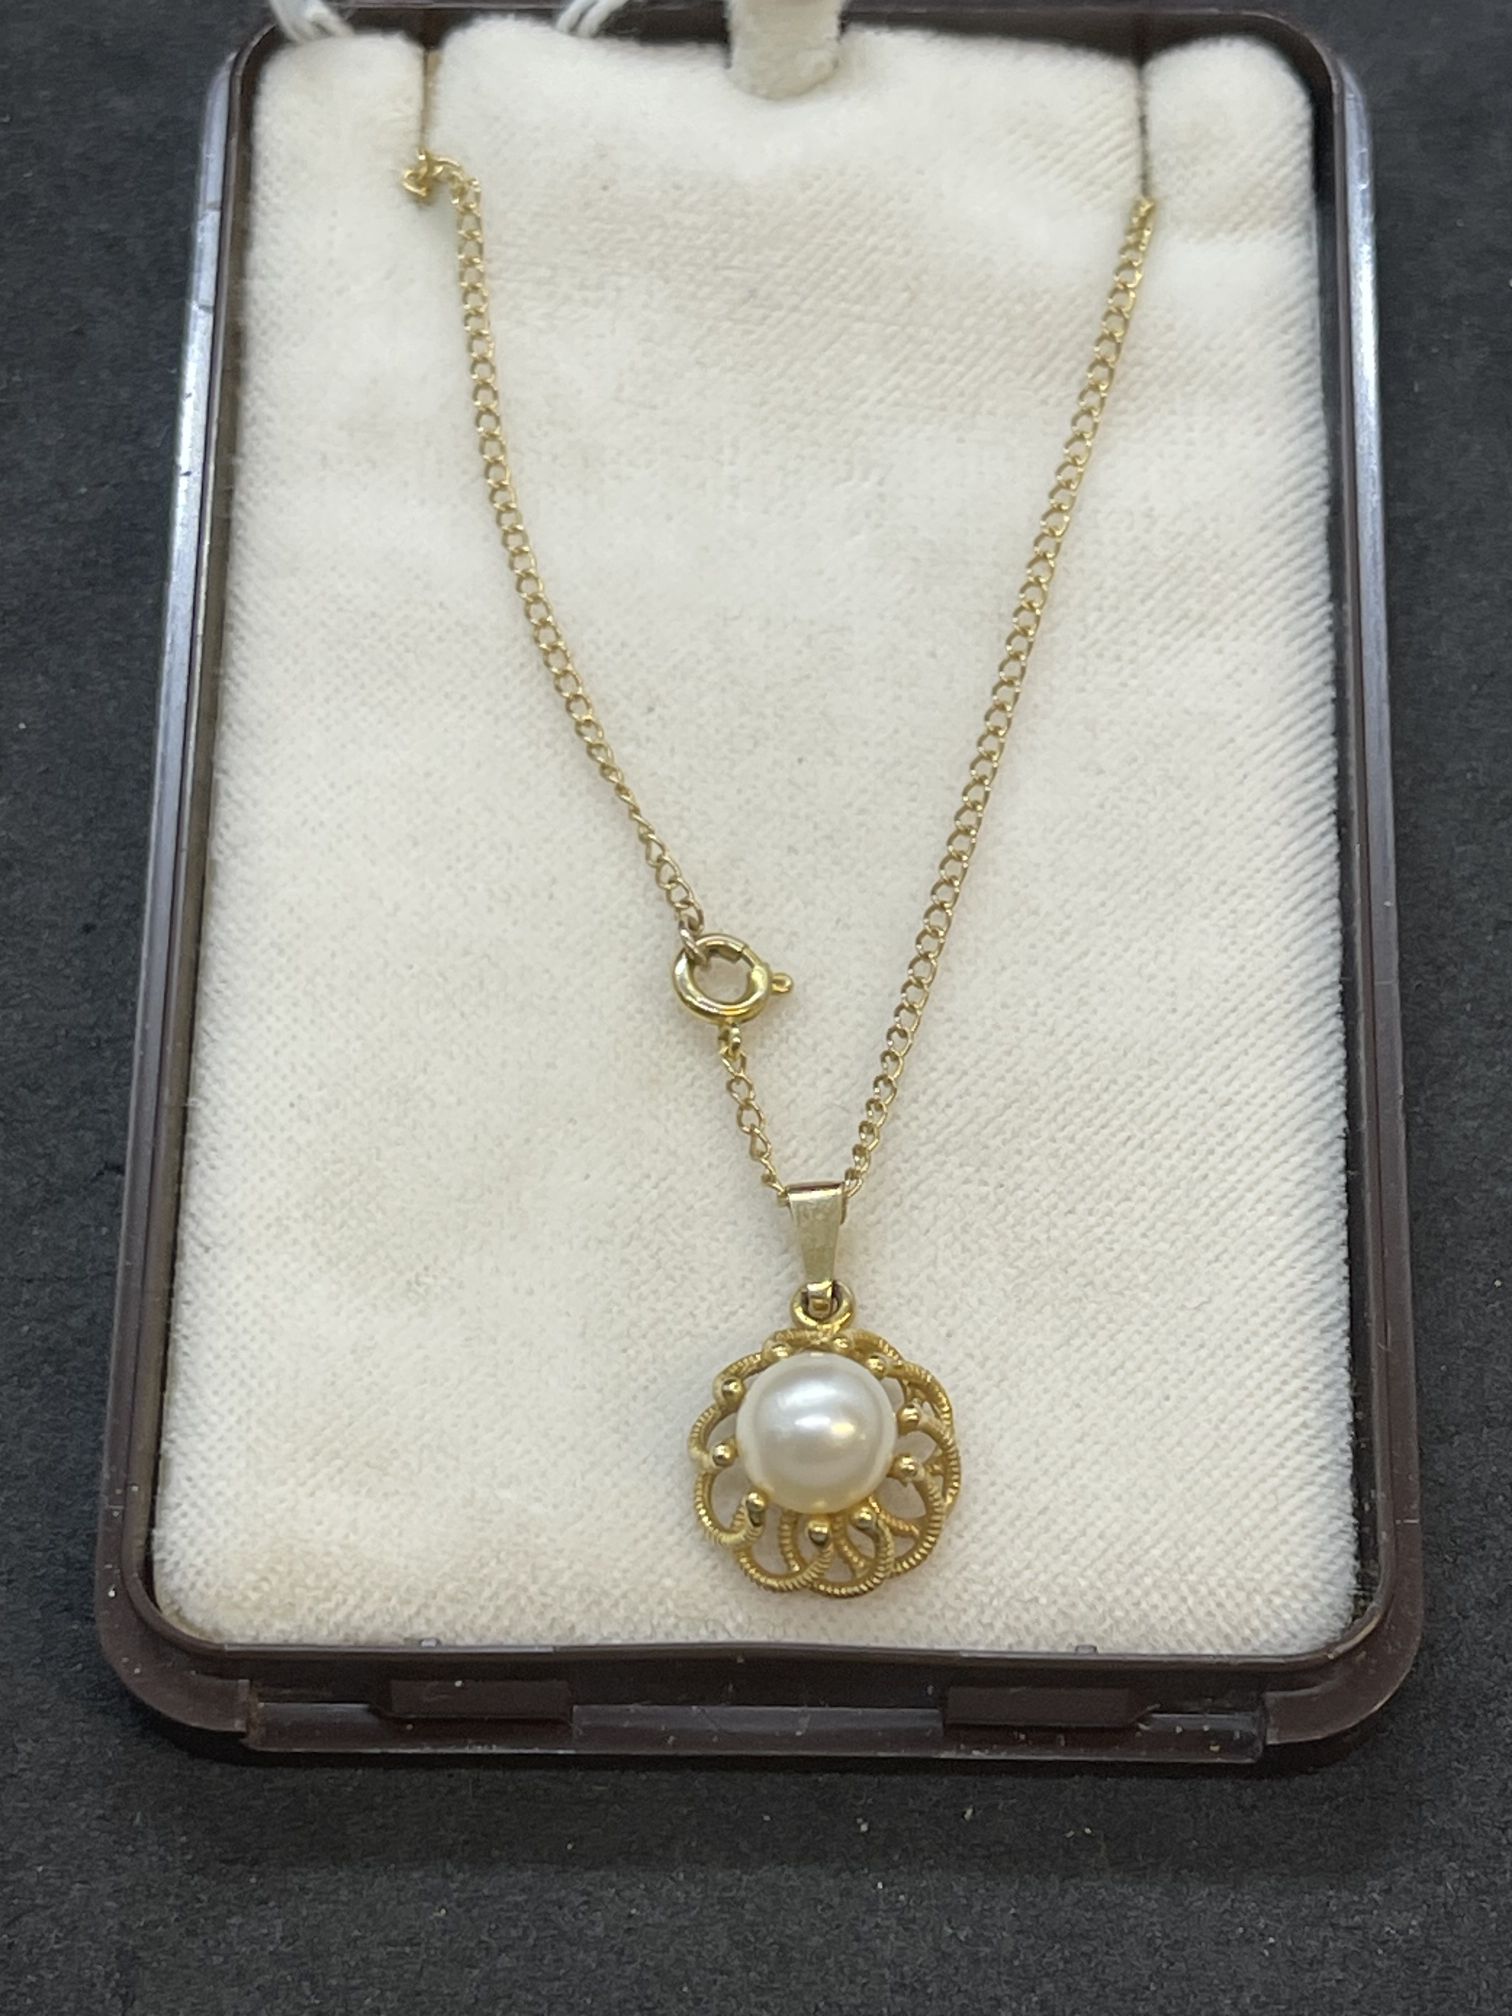 Jewellery: 9ct gold chain (18ins) with a pearl pendant attached, size of cultured pearl 7mm. - Image 2 of 3